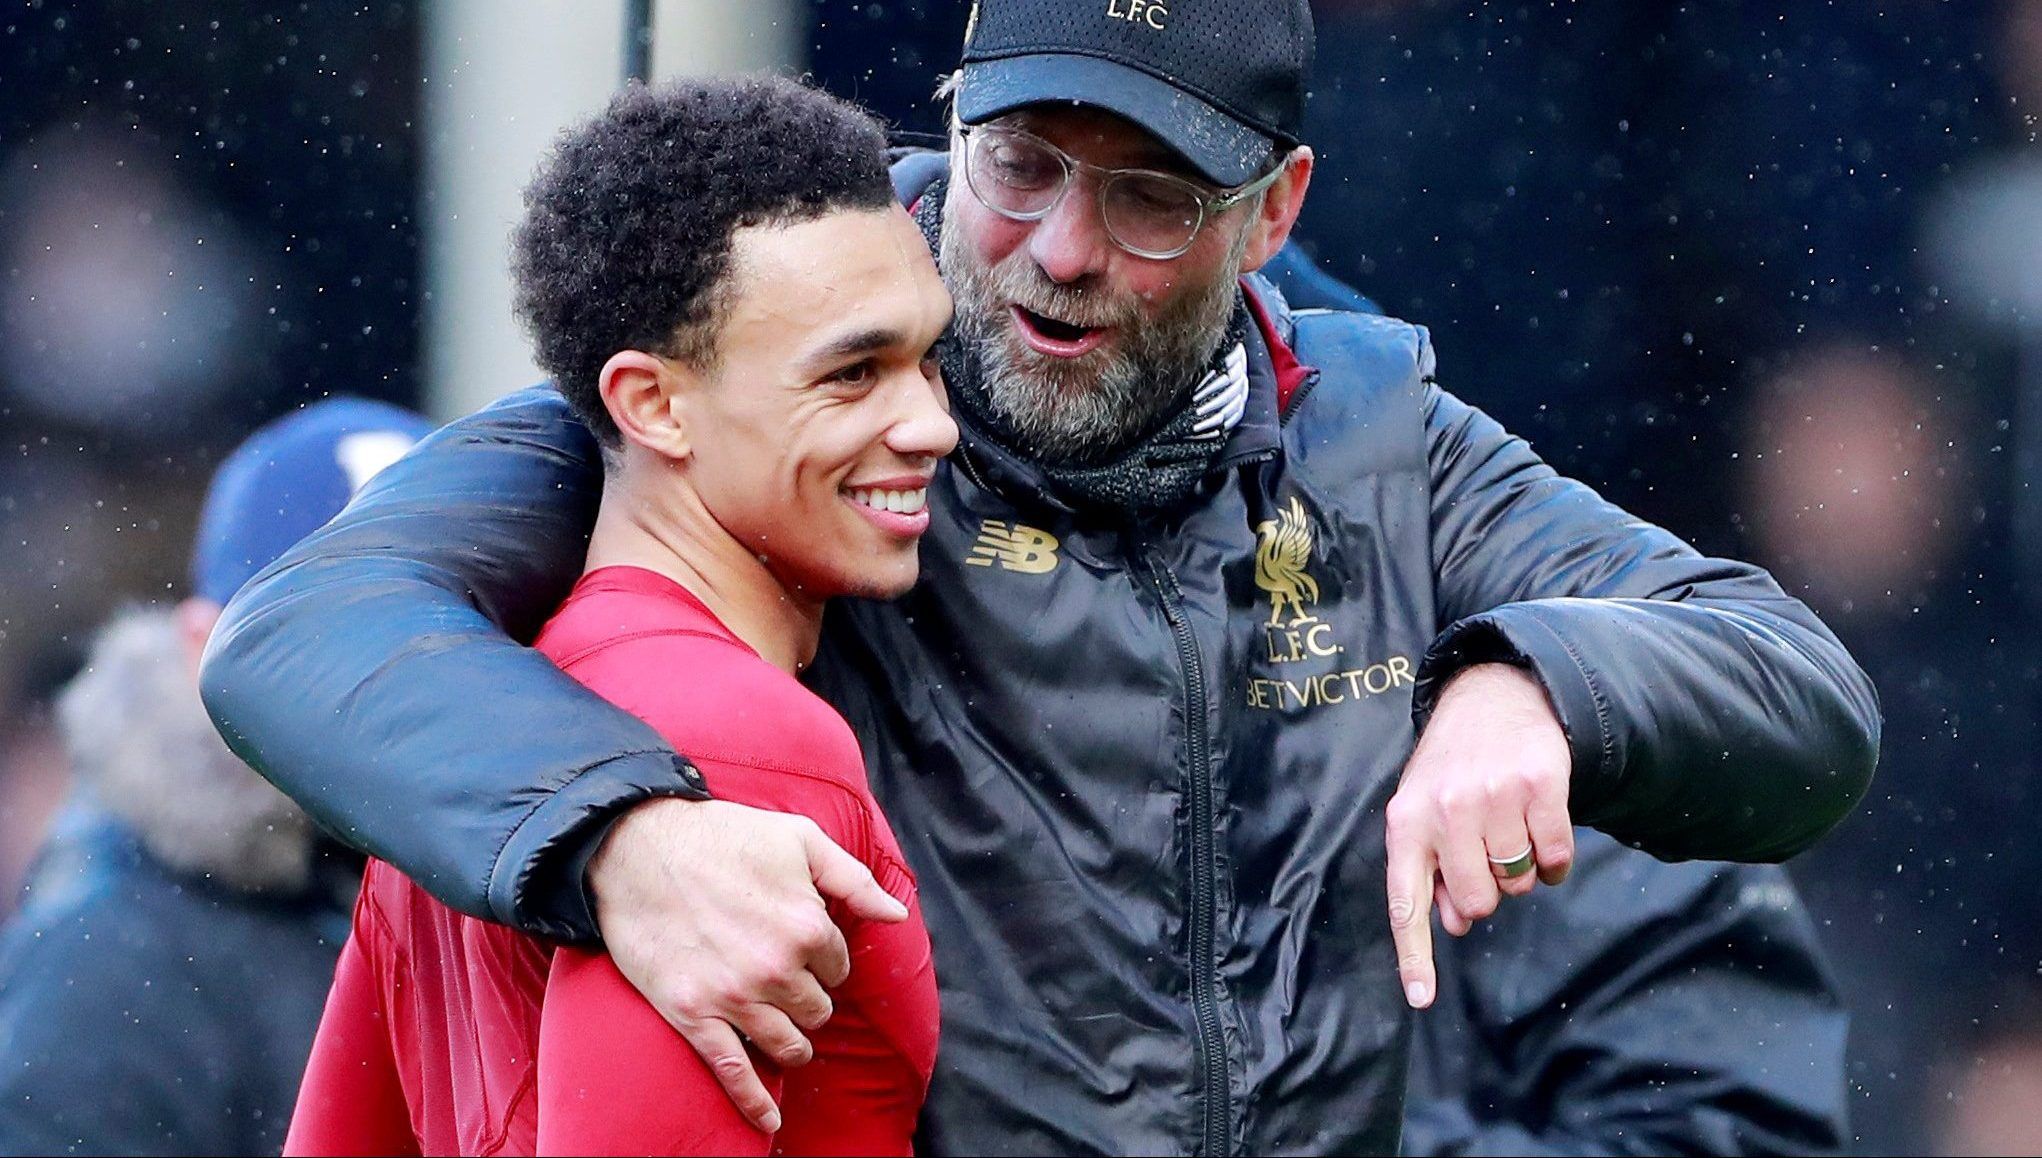 Soccer Football - Premier League - Fulham v Liverpool - Craven Cottage, London, Britain - March 17, 2019  Liverpool manager Juergen Klopp celebrates with Trent Alexander-Arnold after the match           Action Images via Reuters/Andrew Couldridge  EDITORIAL USE ONLY. No use with unauthorized audio, video, data, fixture lists, club/league logos or 